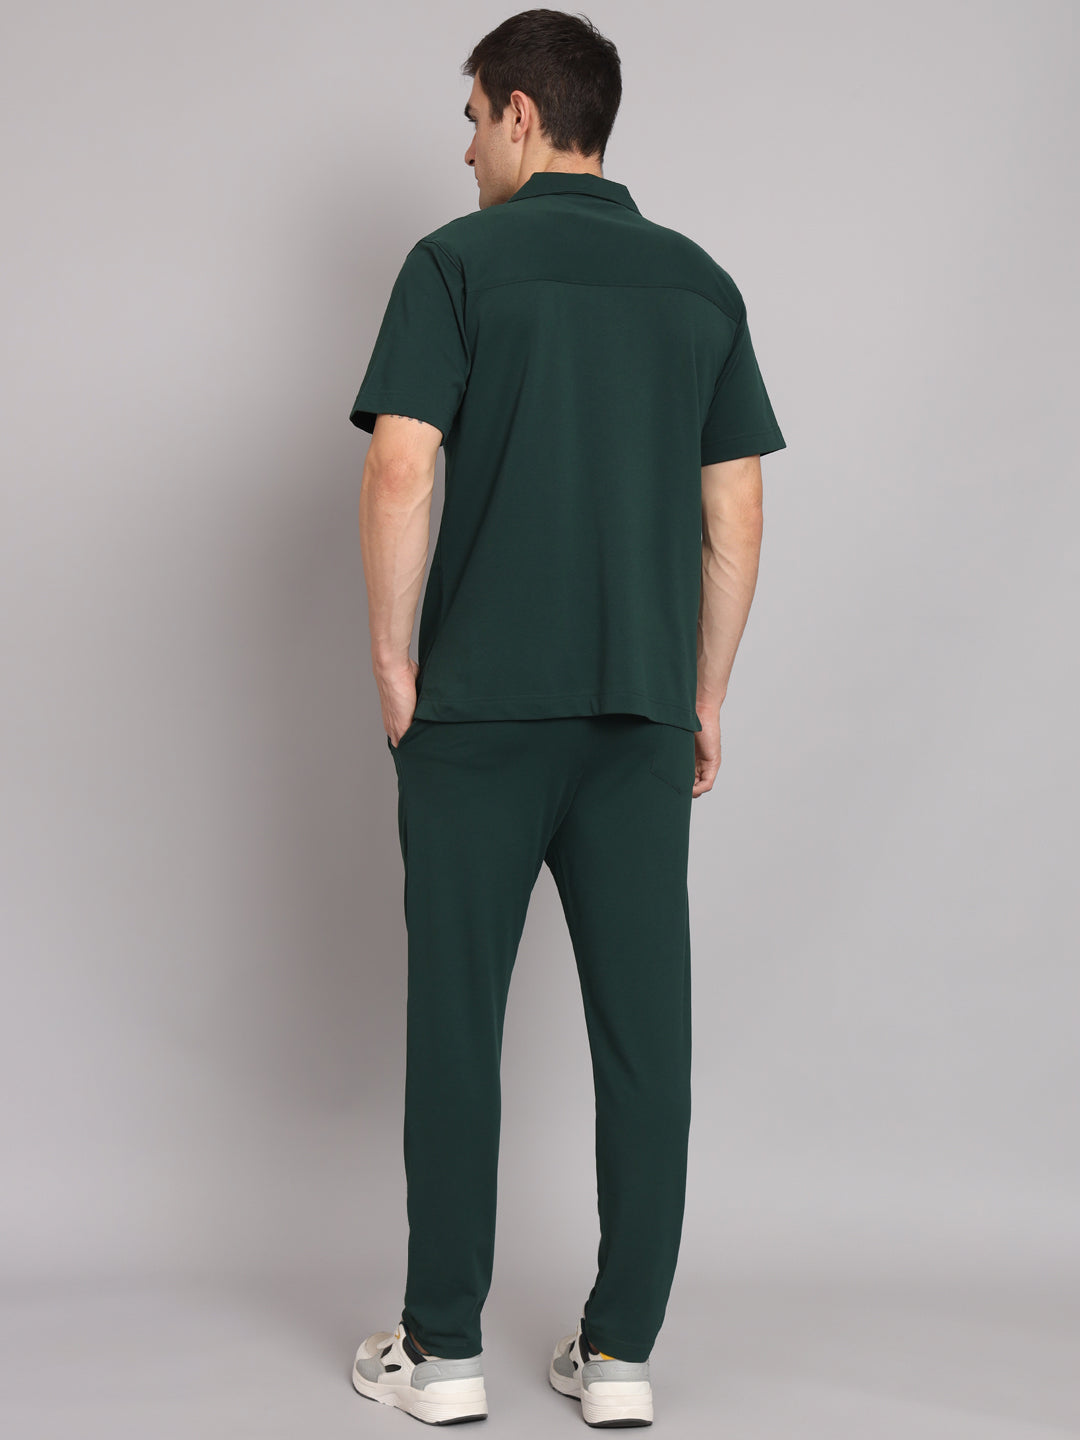 Griffel Men's Pre Winter Front Logo Solid Cotton Basic Green Bowling Shirt and Joggers Full Co-Ord Set - griffel